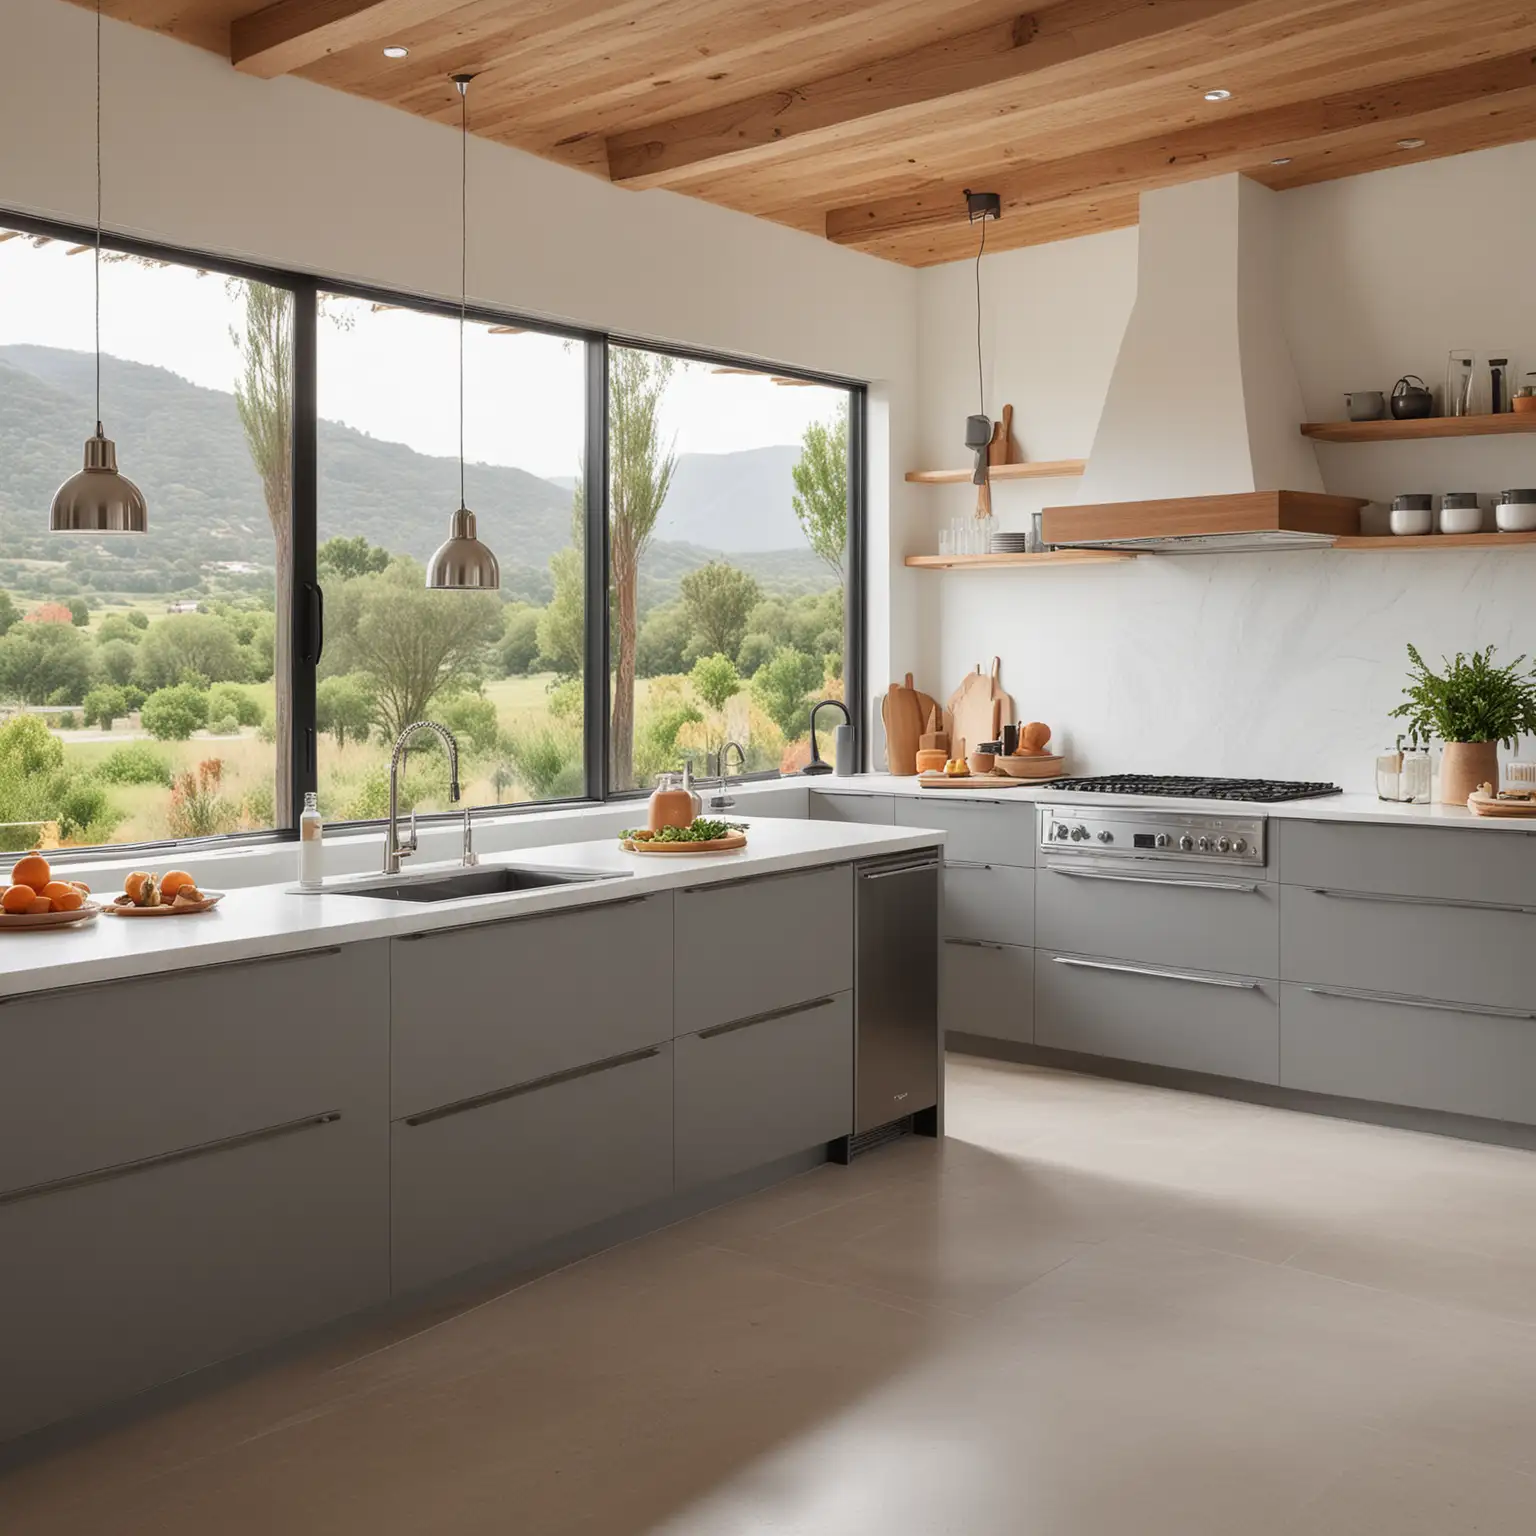 a very long distance wide shot of a modern kitchen Embraced by a panoramic view of rolling hills, this kitchen showcases matte grey, handle-less cabinetry and white Corian countertops. Built-in stainless steel appliances offer functionality without compromising on style, while open wooden shelving adds a natural element. The neutral color palette with a splash of orange reflects the surrounding landscape's warmth, complemented by pendant lights over the island for focused illumination. Rustic clay pots and woven baskets introduce an organic feel, blending seamlessly with the kitchen's sophisticated simplicity.